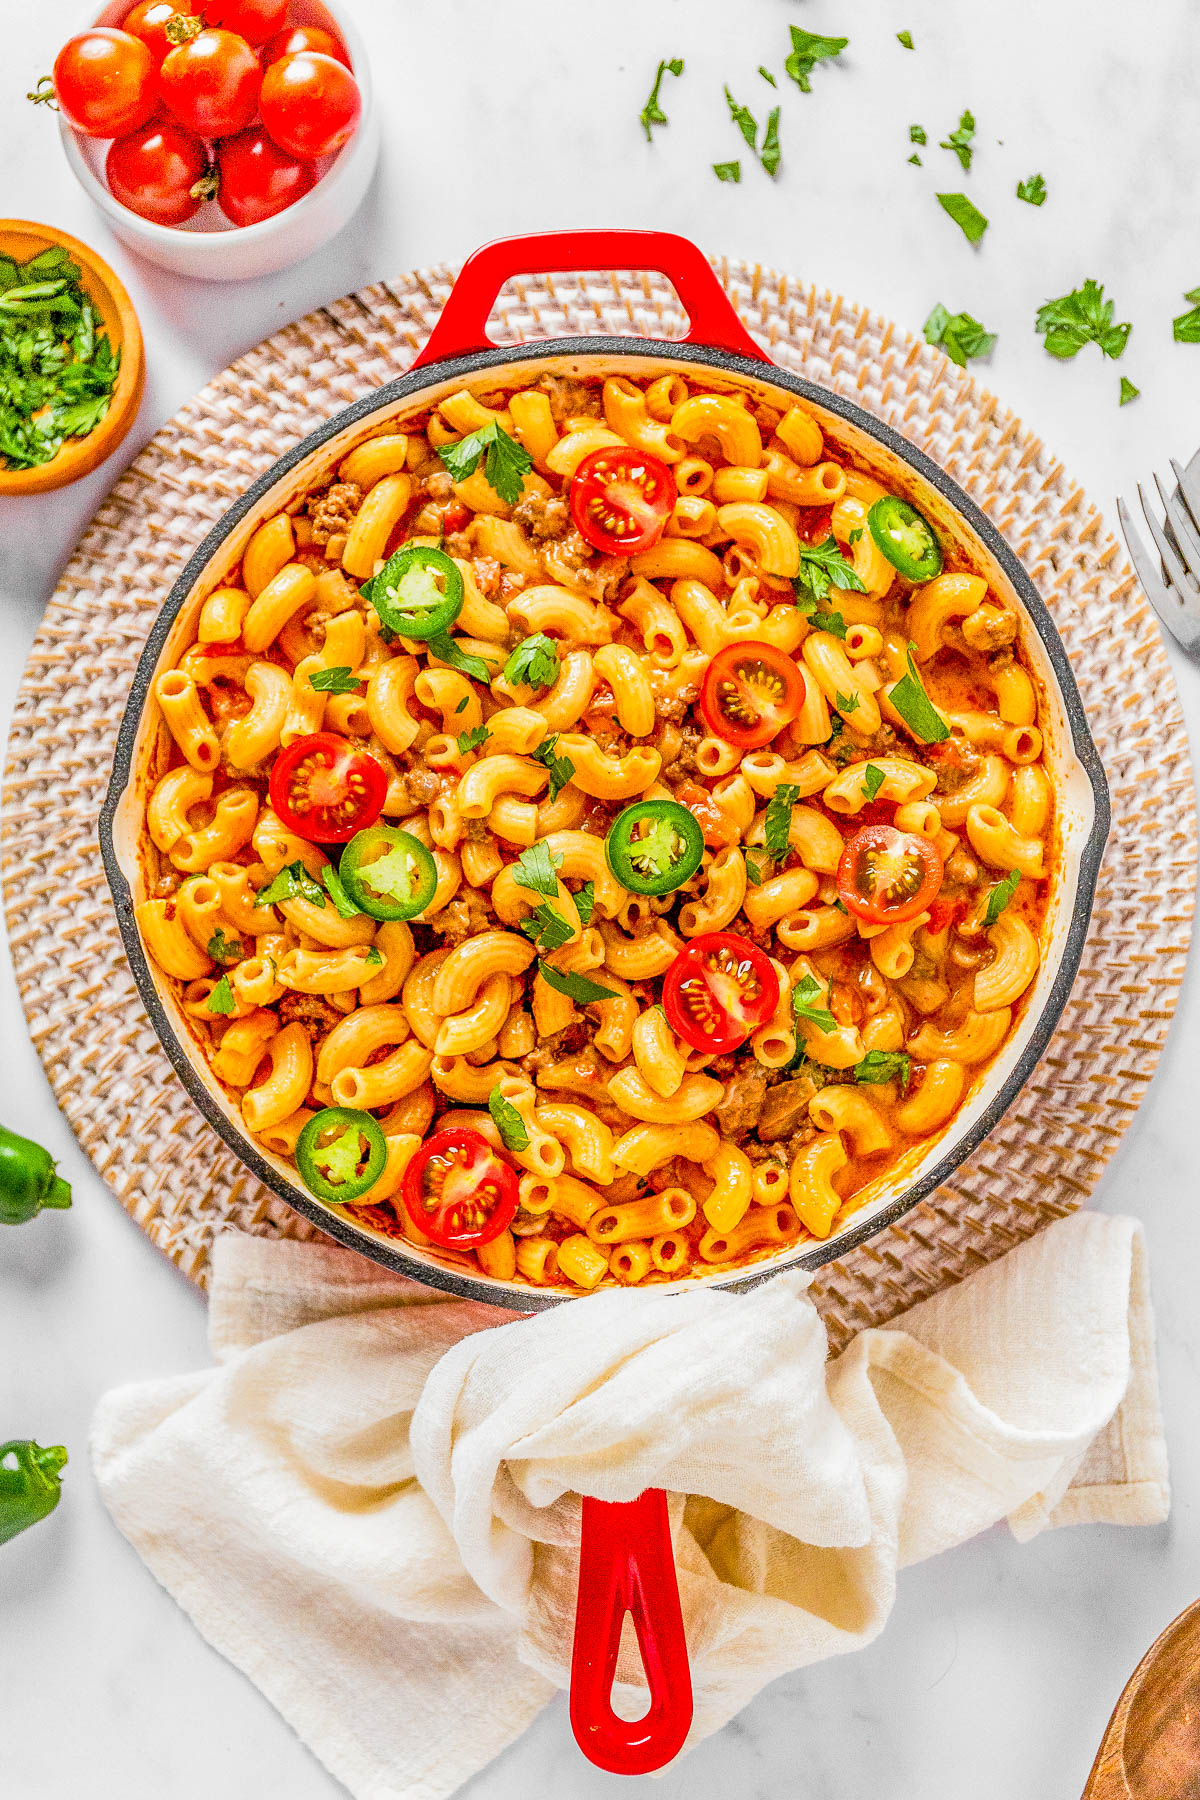 A vibrant top-down image of a red skillet filled with macaroni pasta mixed with tomatoes, green peppers, and herbs on a white background.